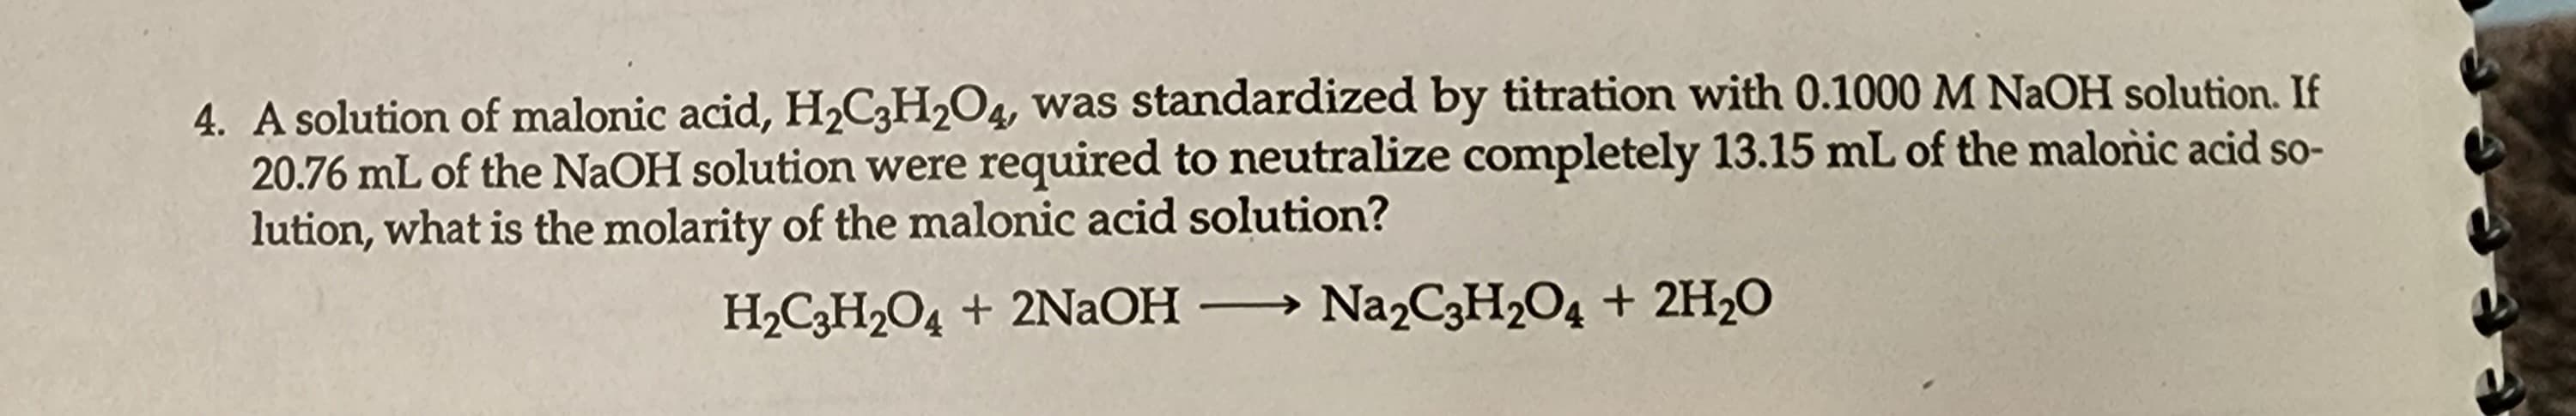 4. A solution of malonic acid, H₂C3H₂O4, was standardized by titration with 0.1000 M NaOH solution. If
20.76 mL of the NaOH solution were required to neutralize completely 13.15 mL of the malonic acid so-
lution, what is the molarity of the malonic acid solution?
H₂C3H₂O4 + 2NaOH - → Na2C3H₂O4 + 2H₂O